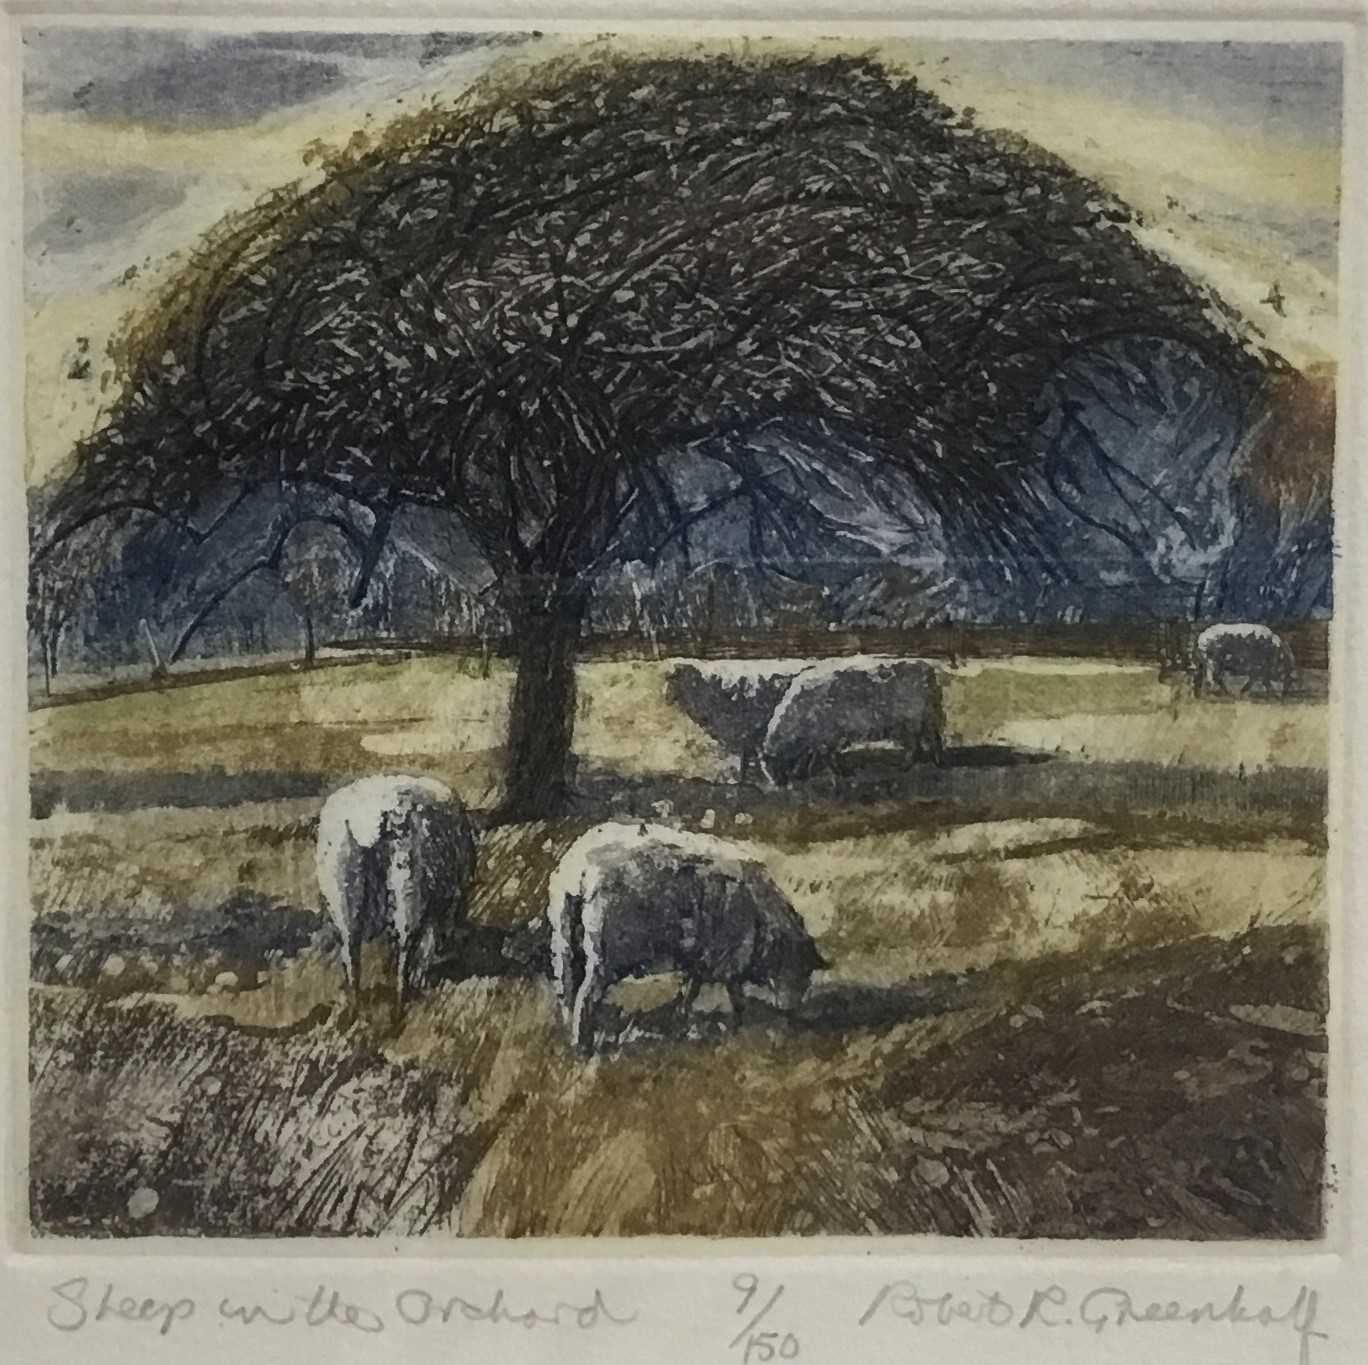 Lot 129 - Robert Greenhalf (b. 1950) colour aquatint, Sheep in the orchard, signed and numbered 9/150, plate 14 x 16cm, glazed frame